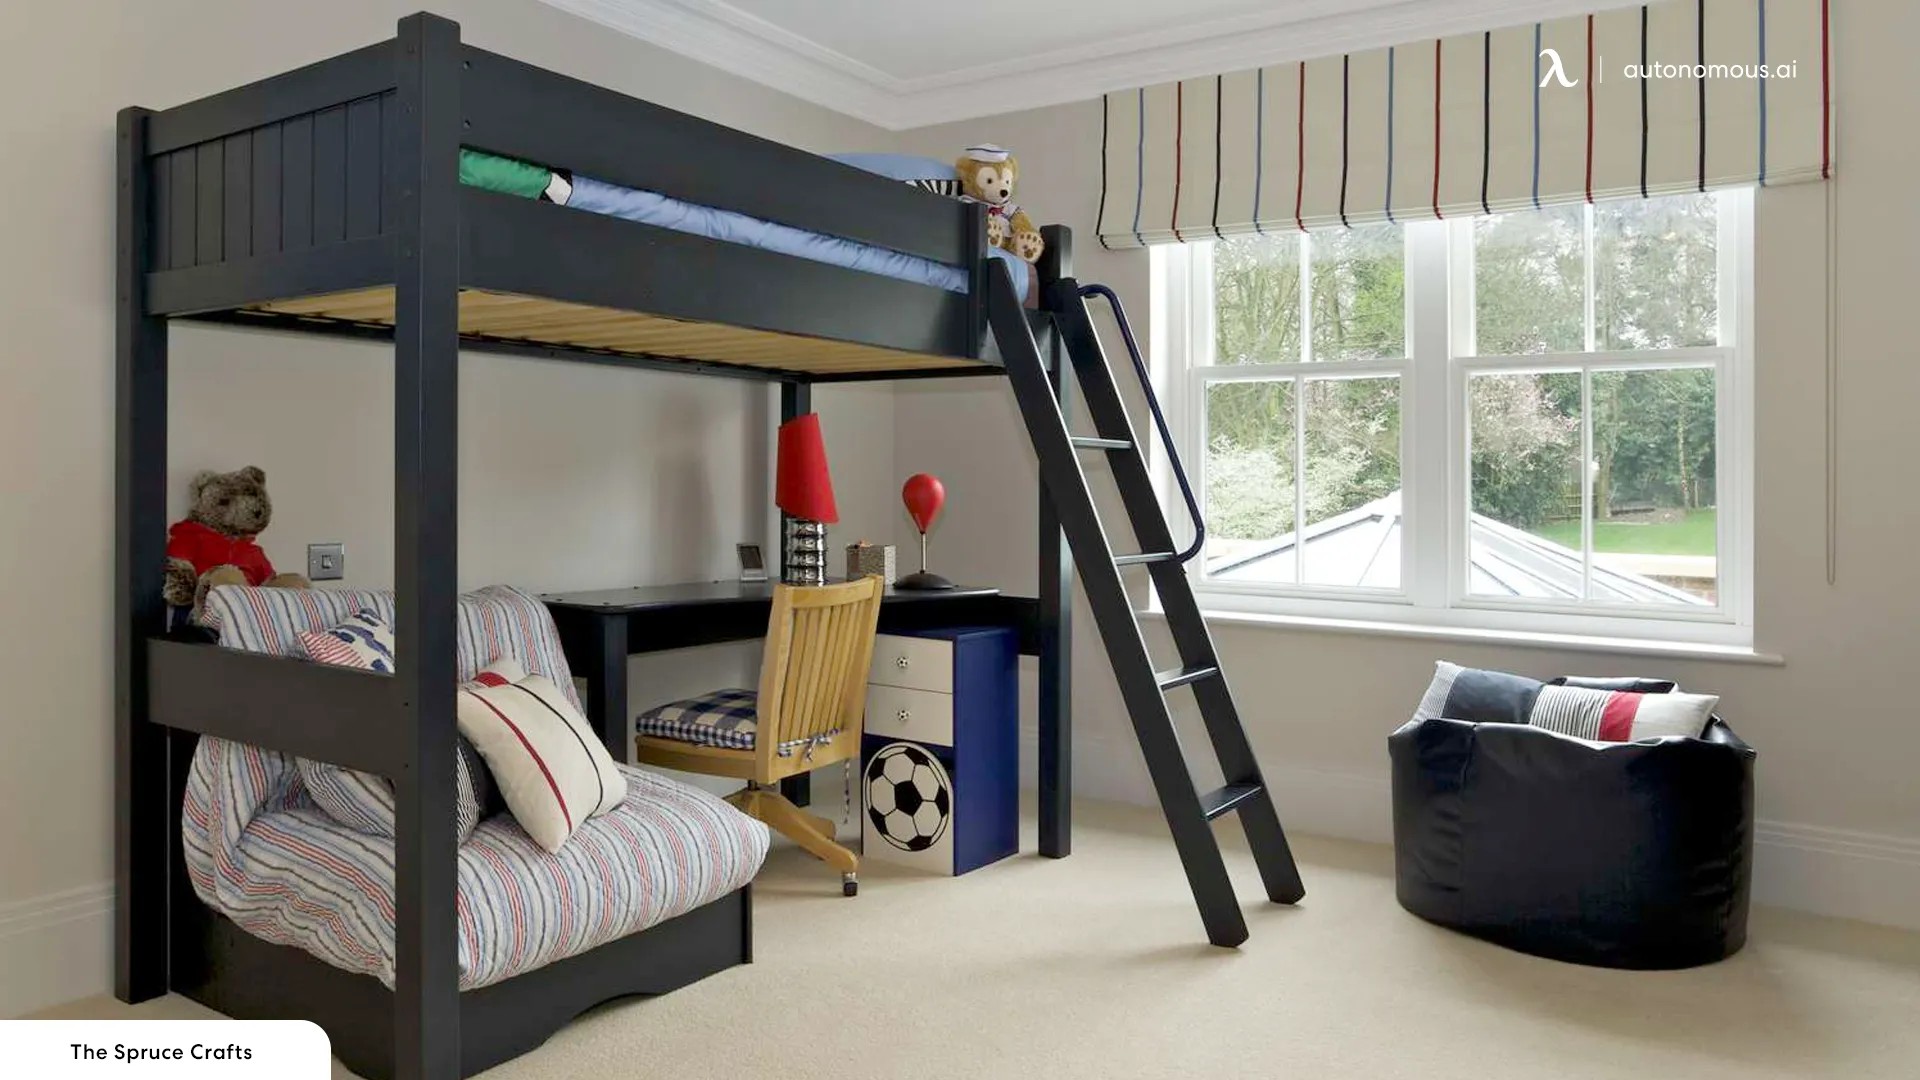 Benefits of a DIY Bunk Bed with Desk